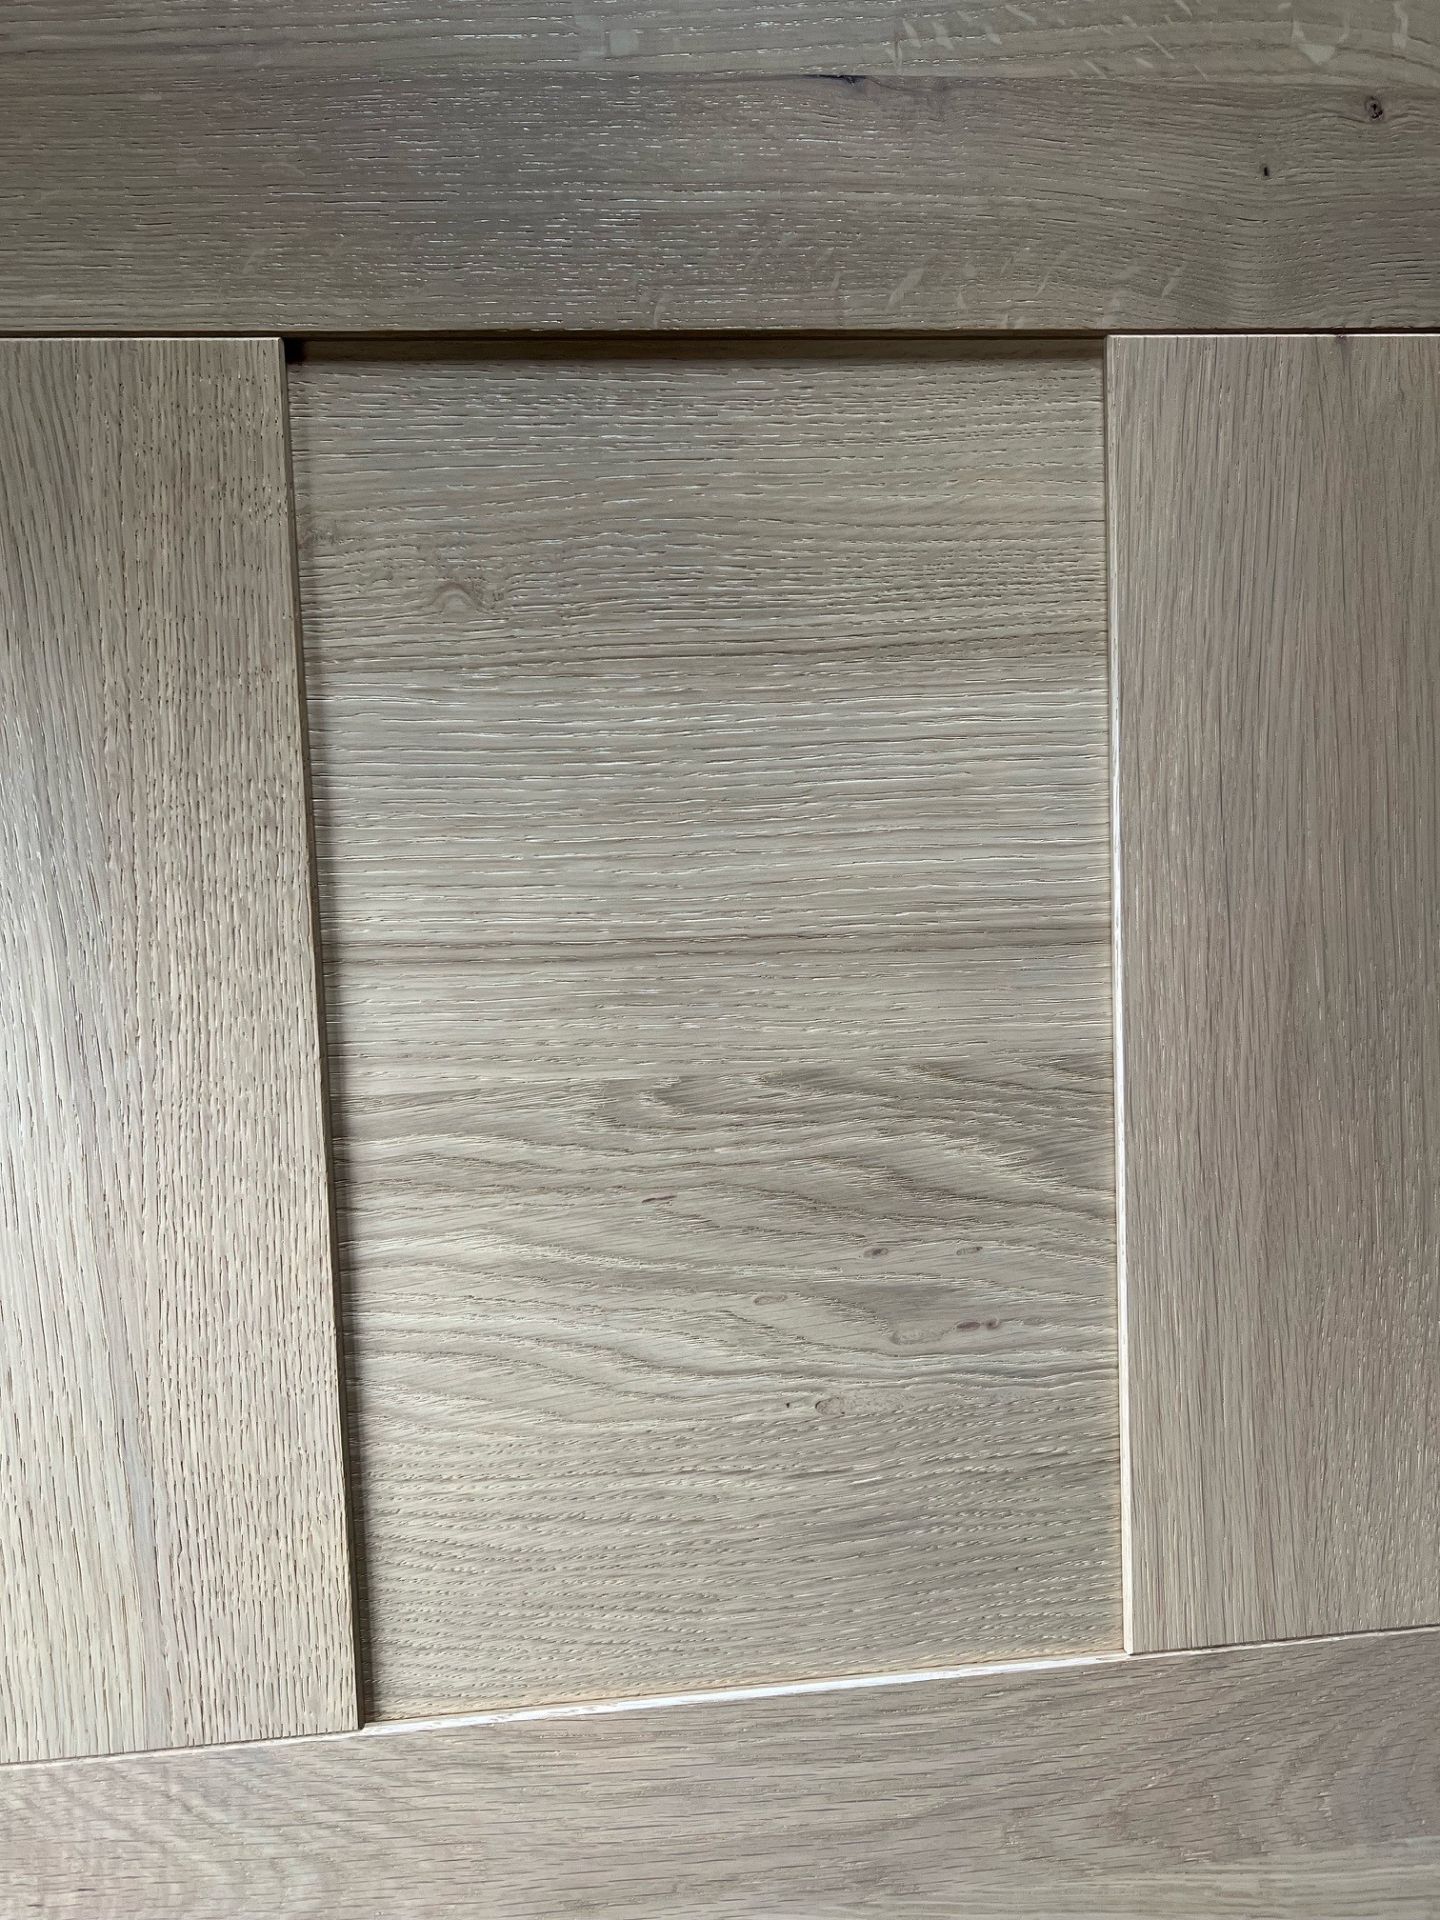 5300 +Solid natural oak kitchen doors, drawer fronts and accessories including glass and curved - Image 2 of 4